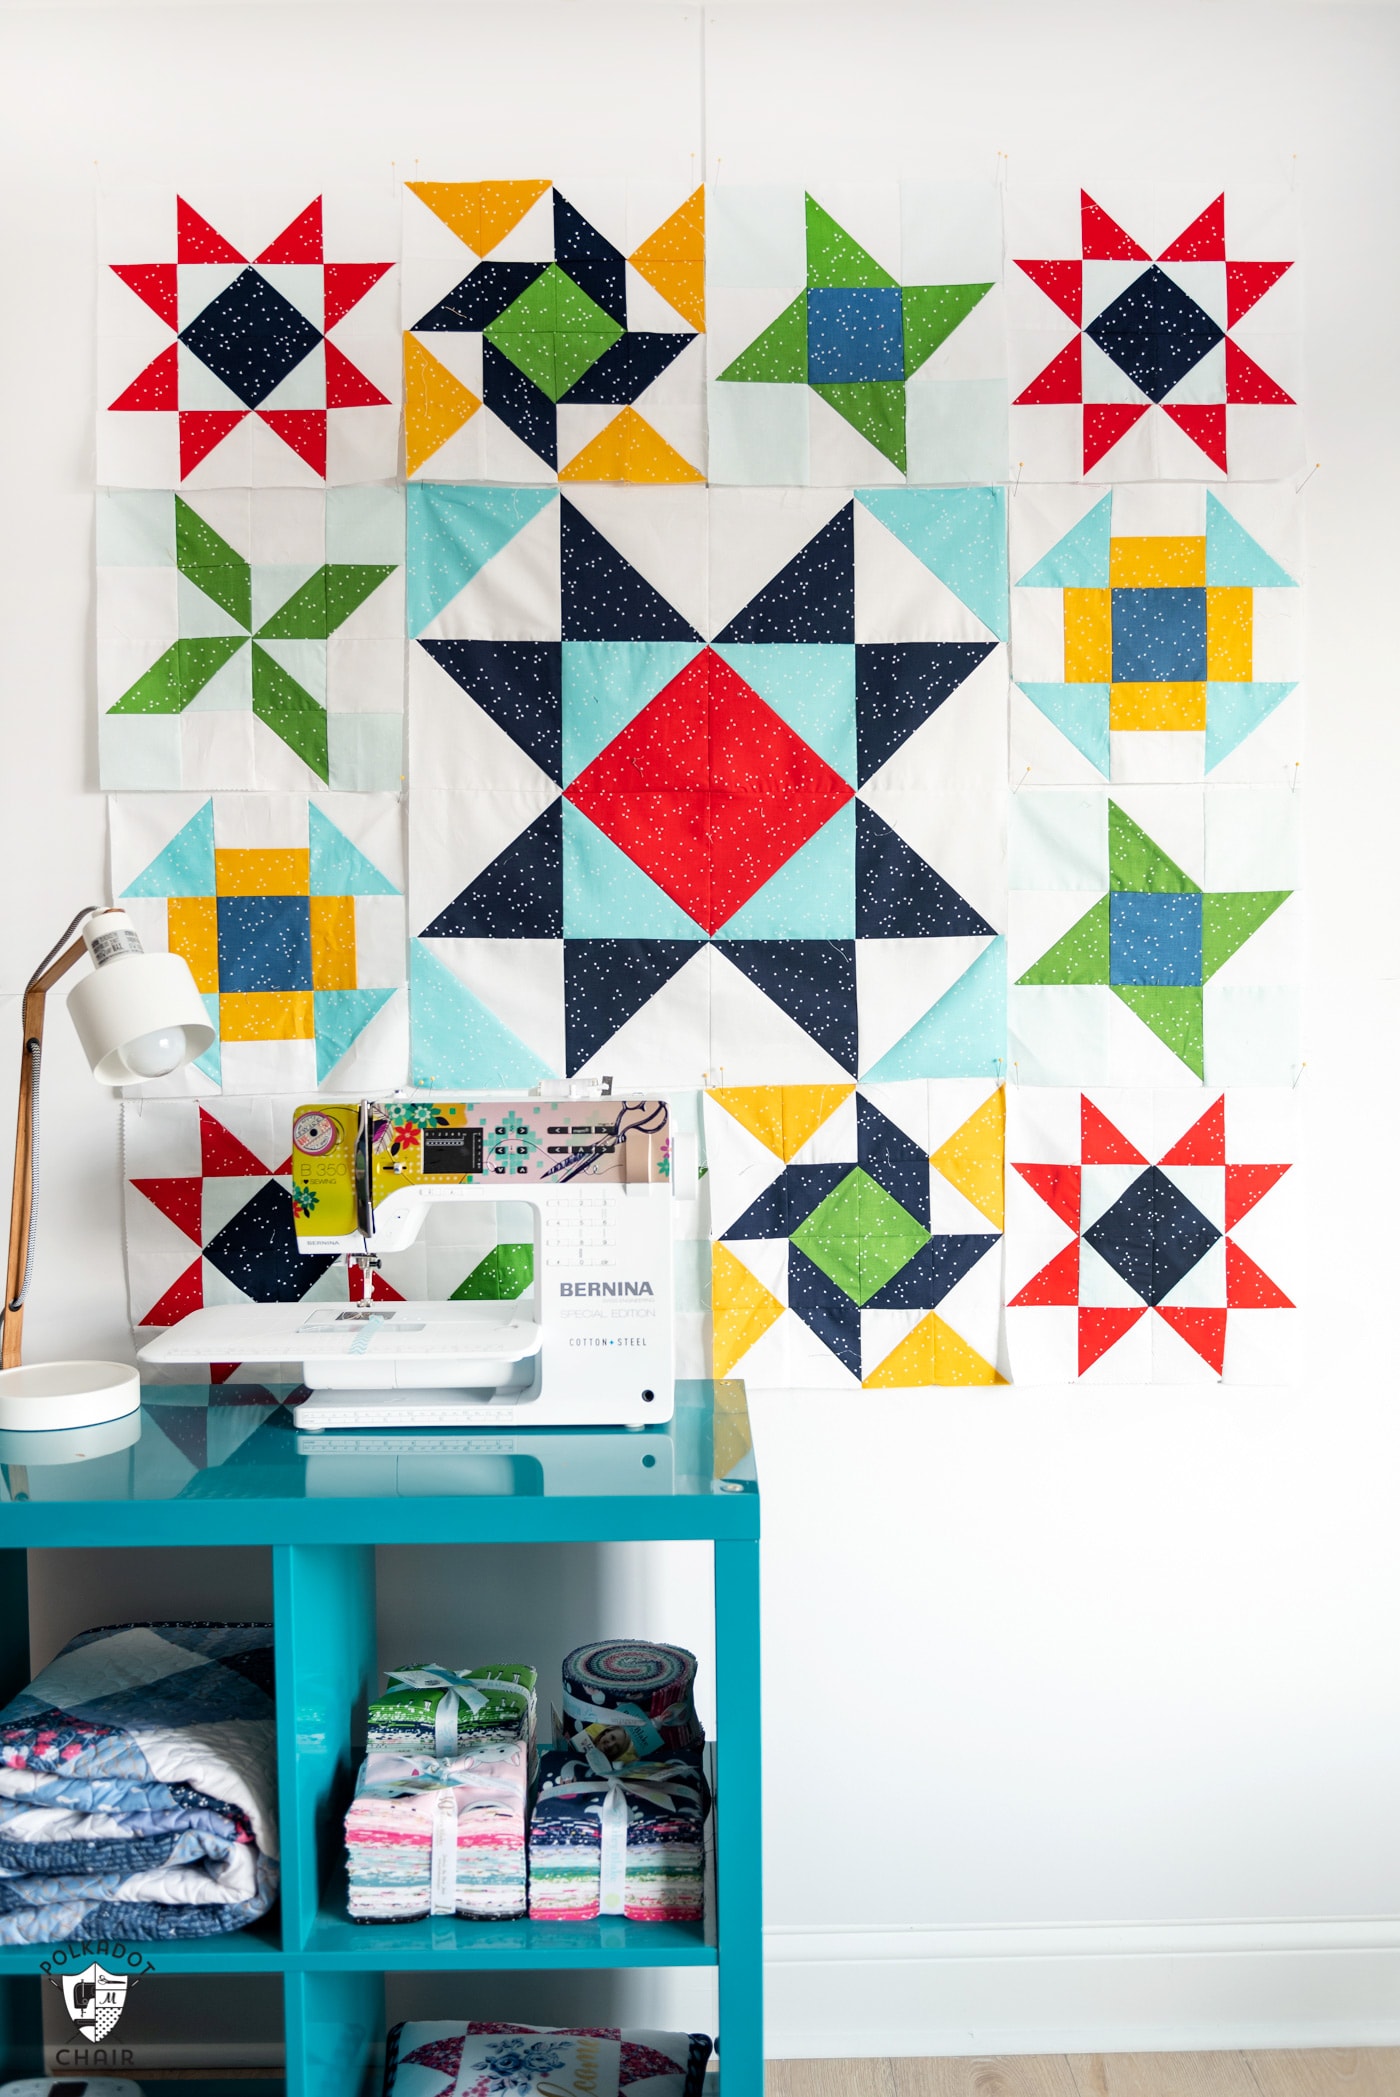 red, blue yellow and green quilt blocks on white wall with sewing machine